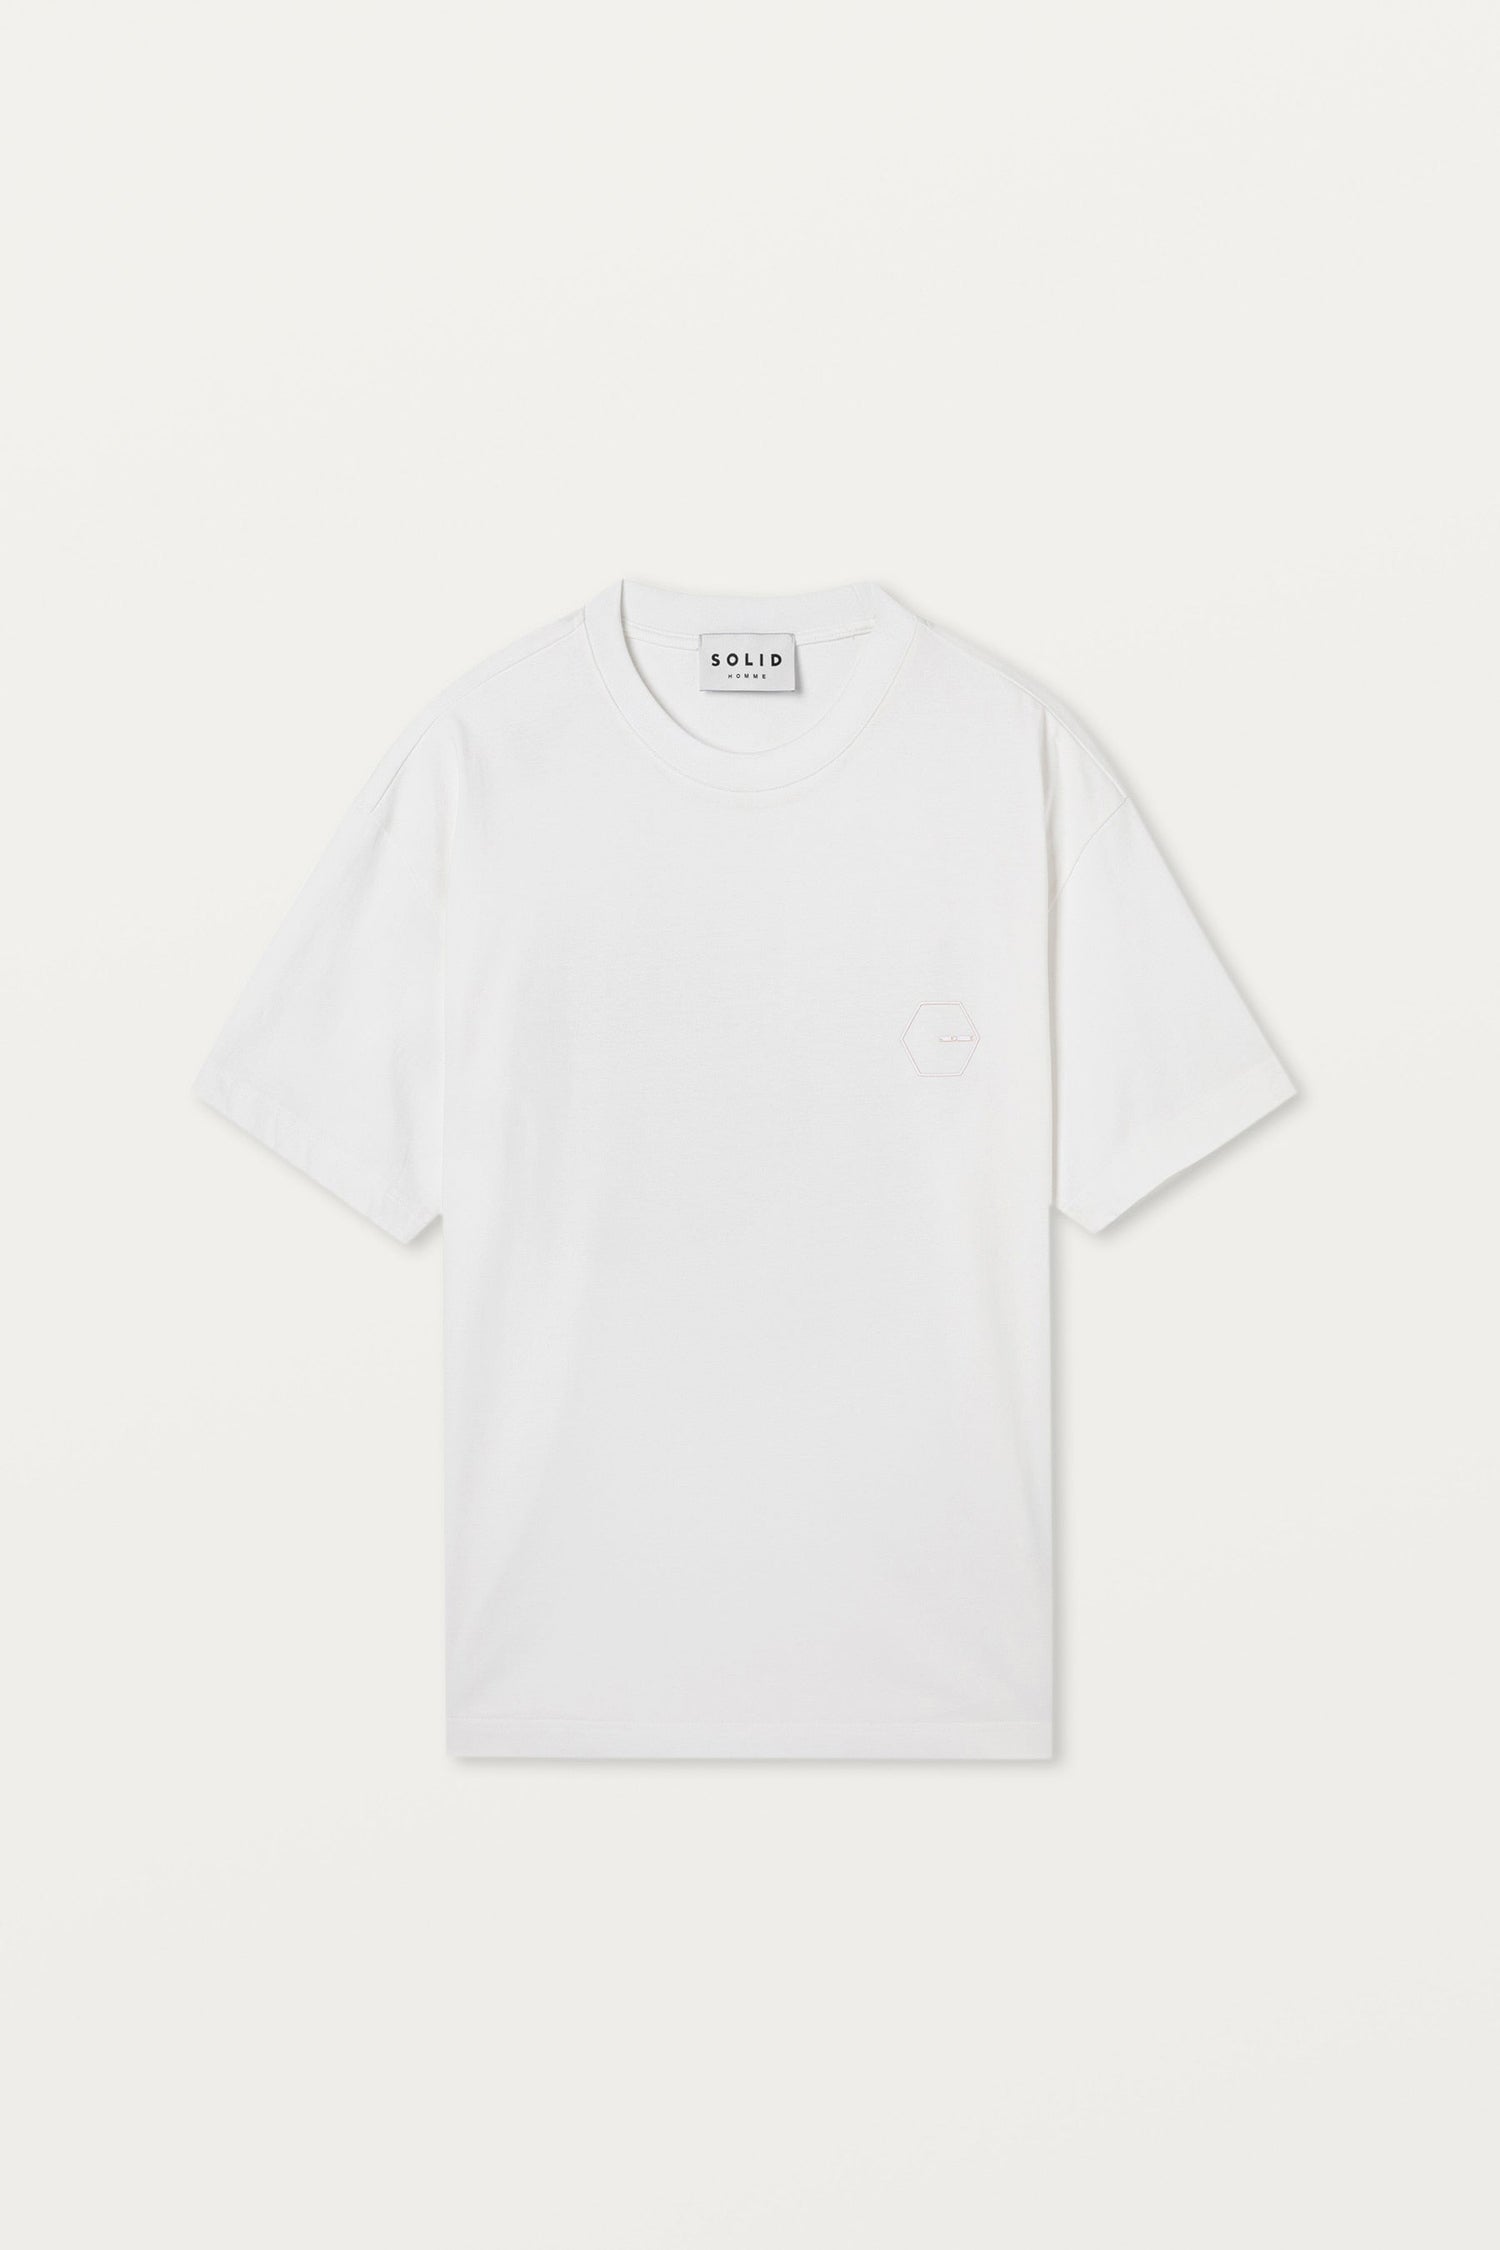 Solid Homme - Men T-Shirt Cot T-shirt Solid Homme White 48 